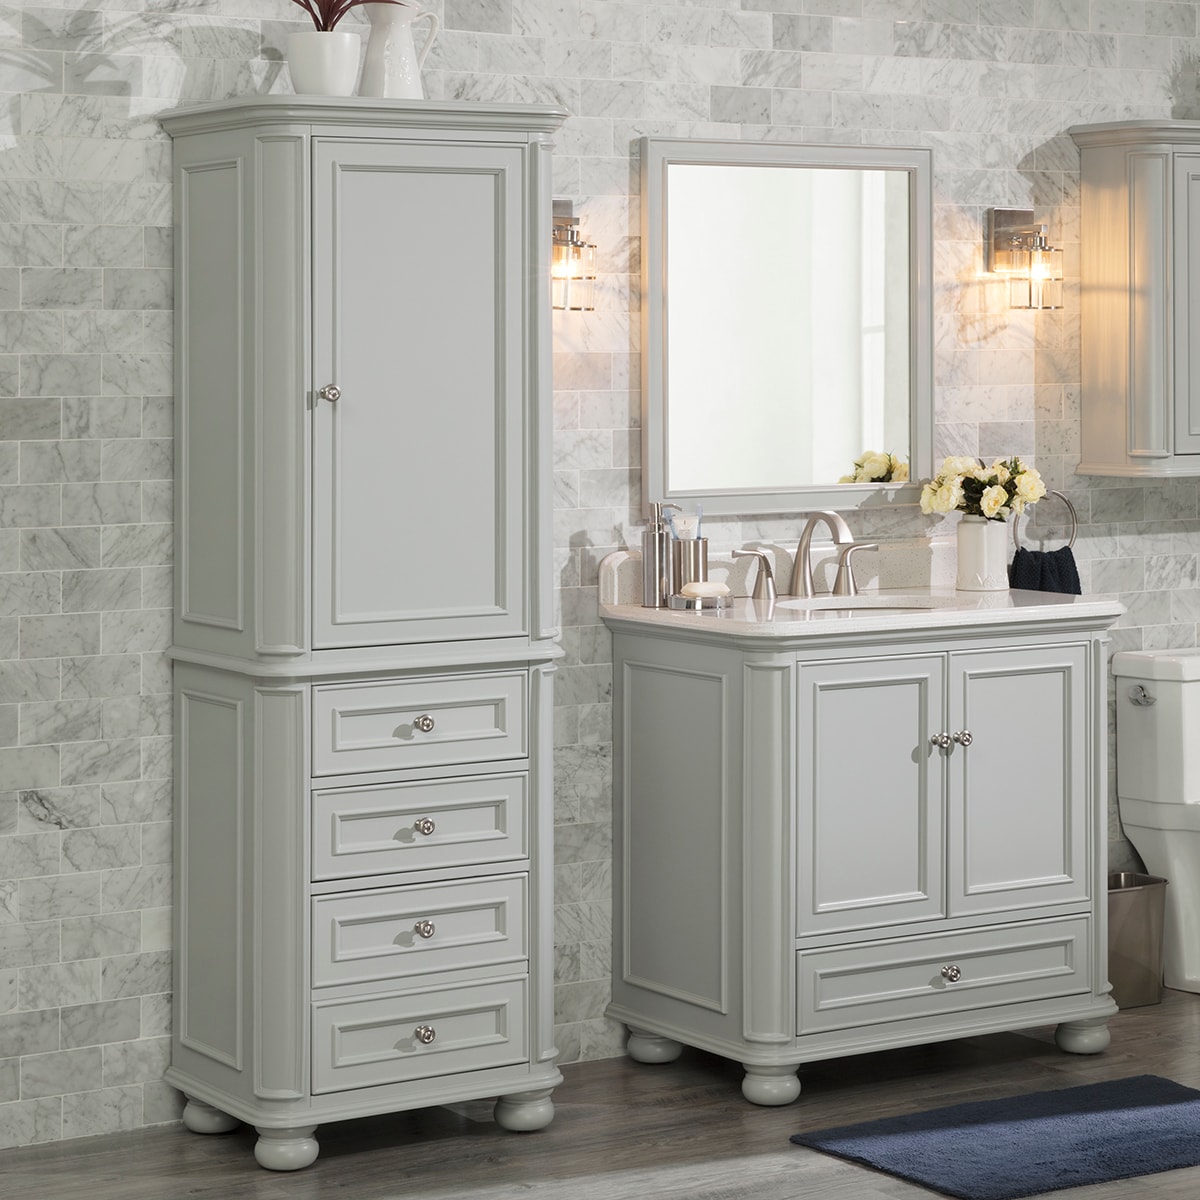 Bathroom Tall Cabinets Freestanding Linen Cabinets at Lowes.com